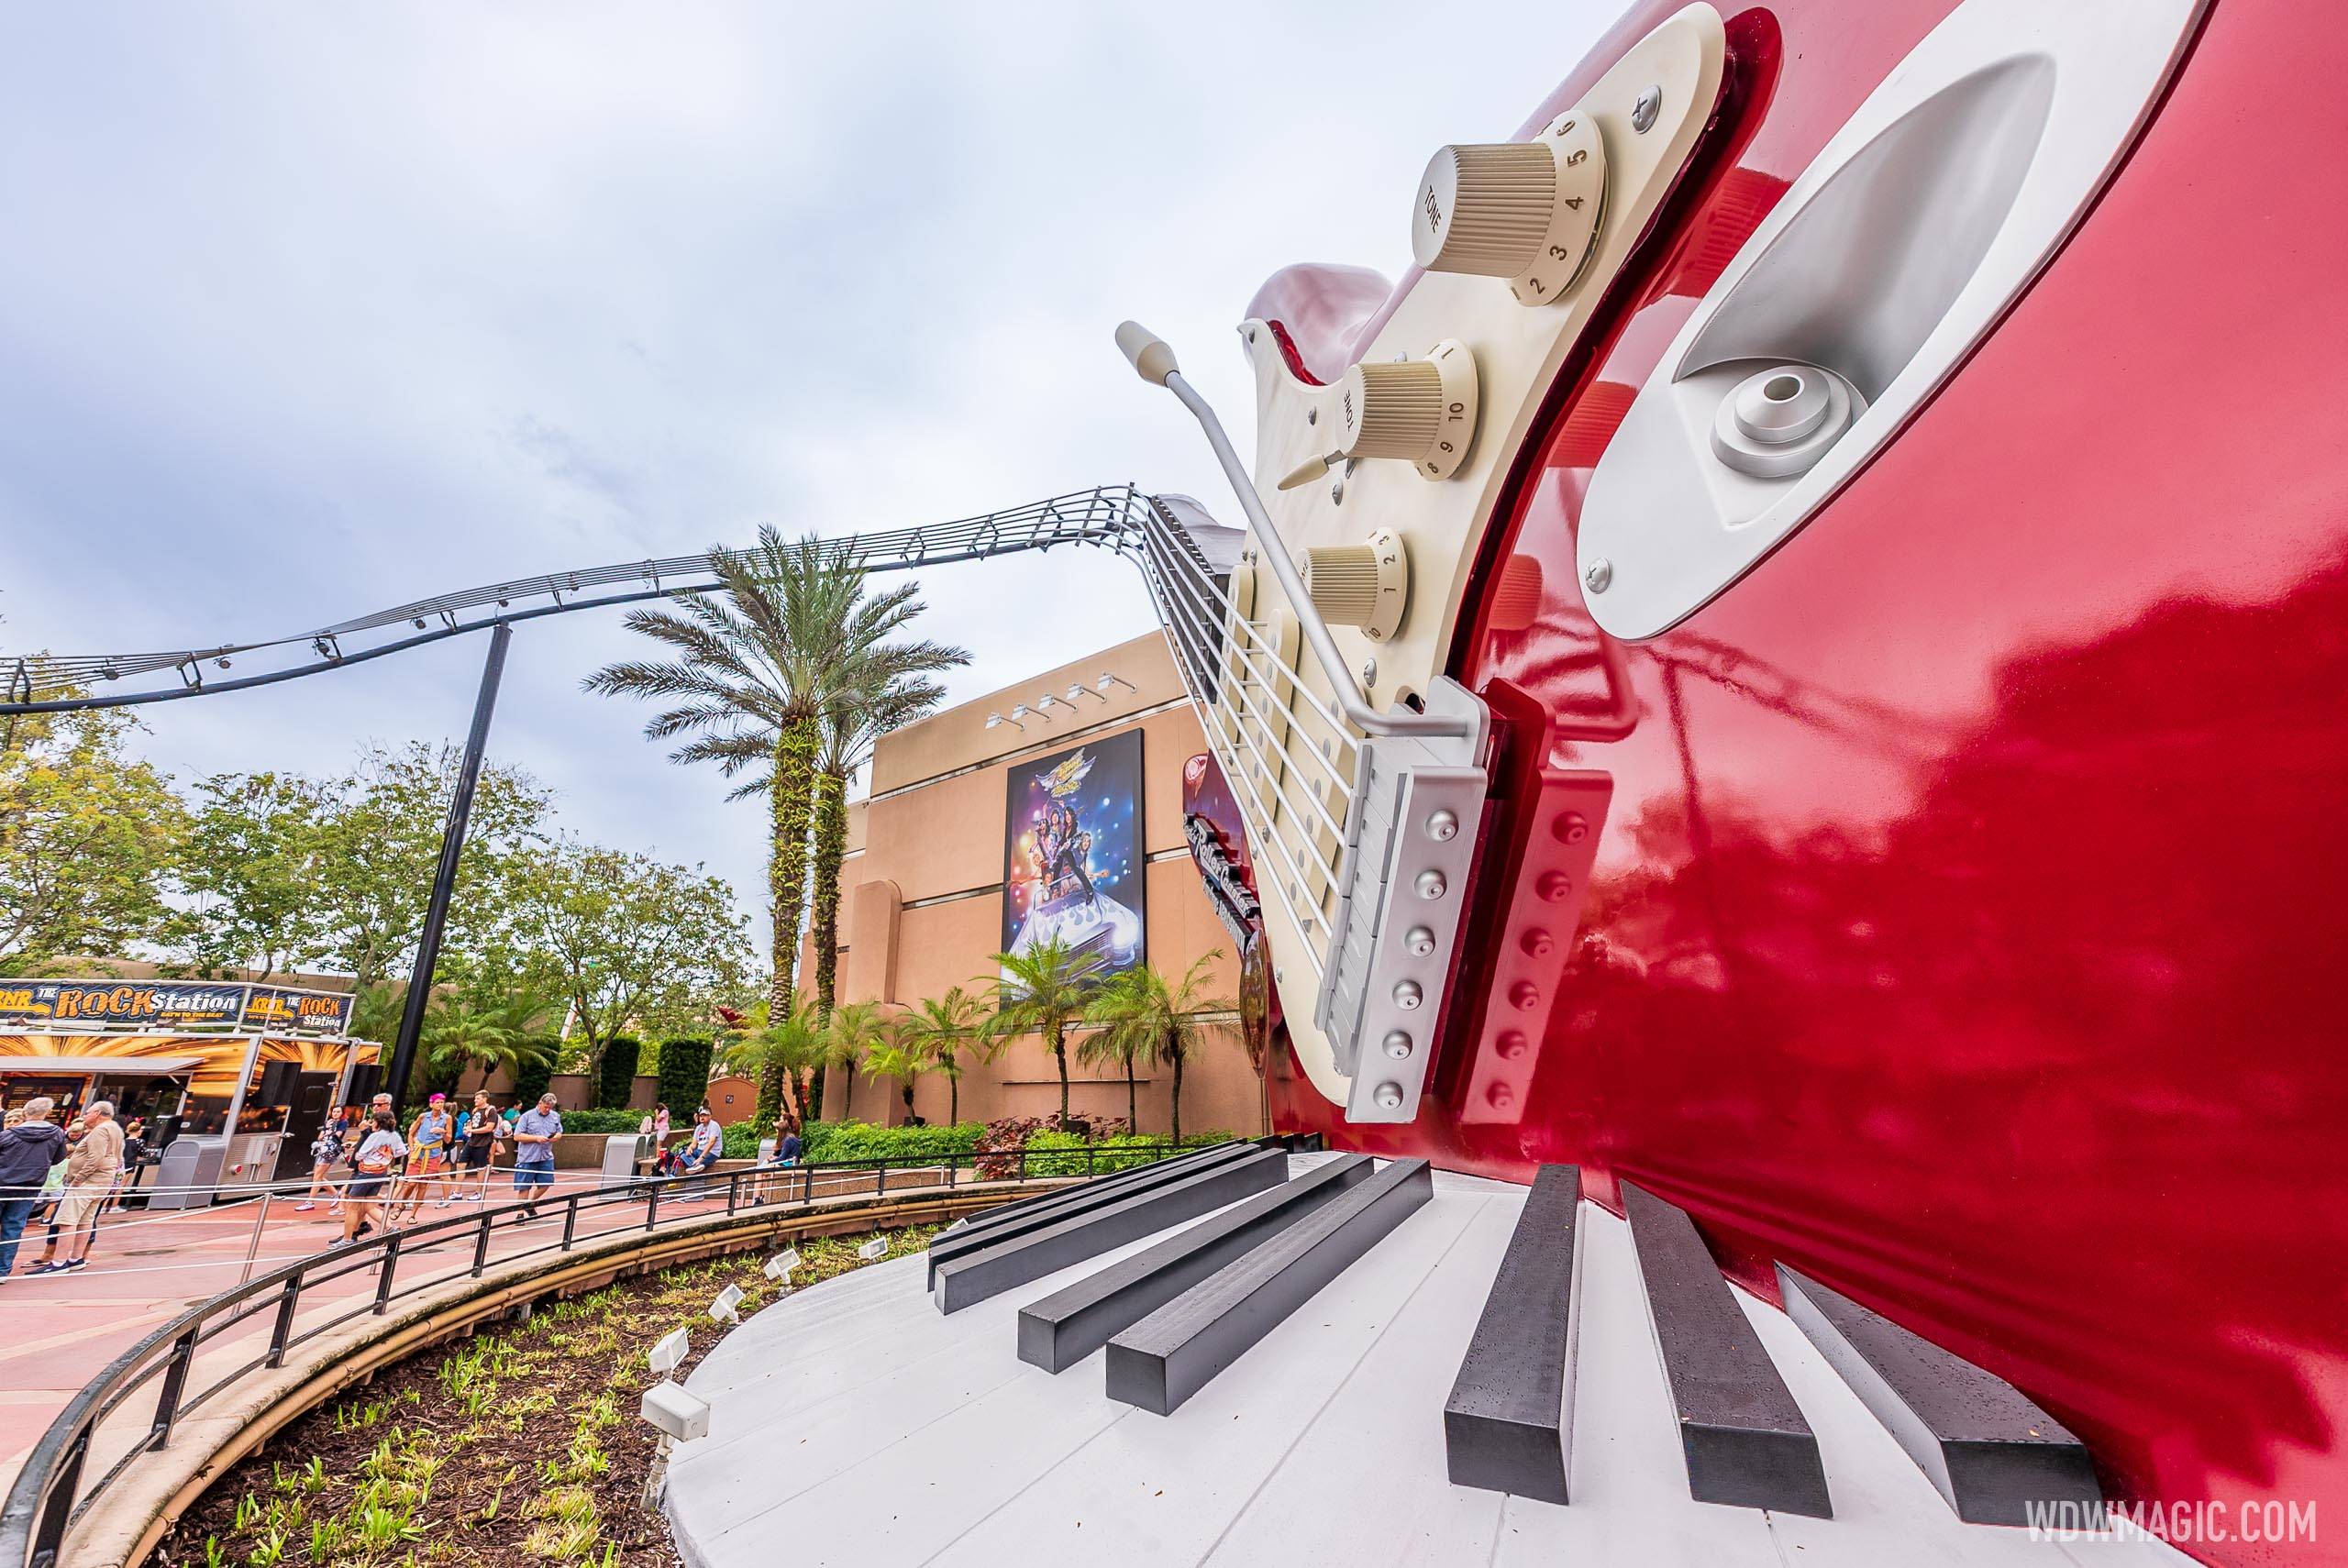 The hugely popular roller coaster ride at Disney's Hollywood Studios has reopened to guests this evening